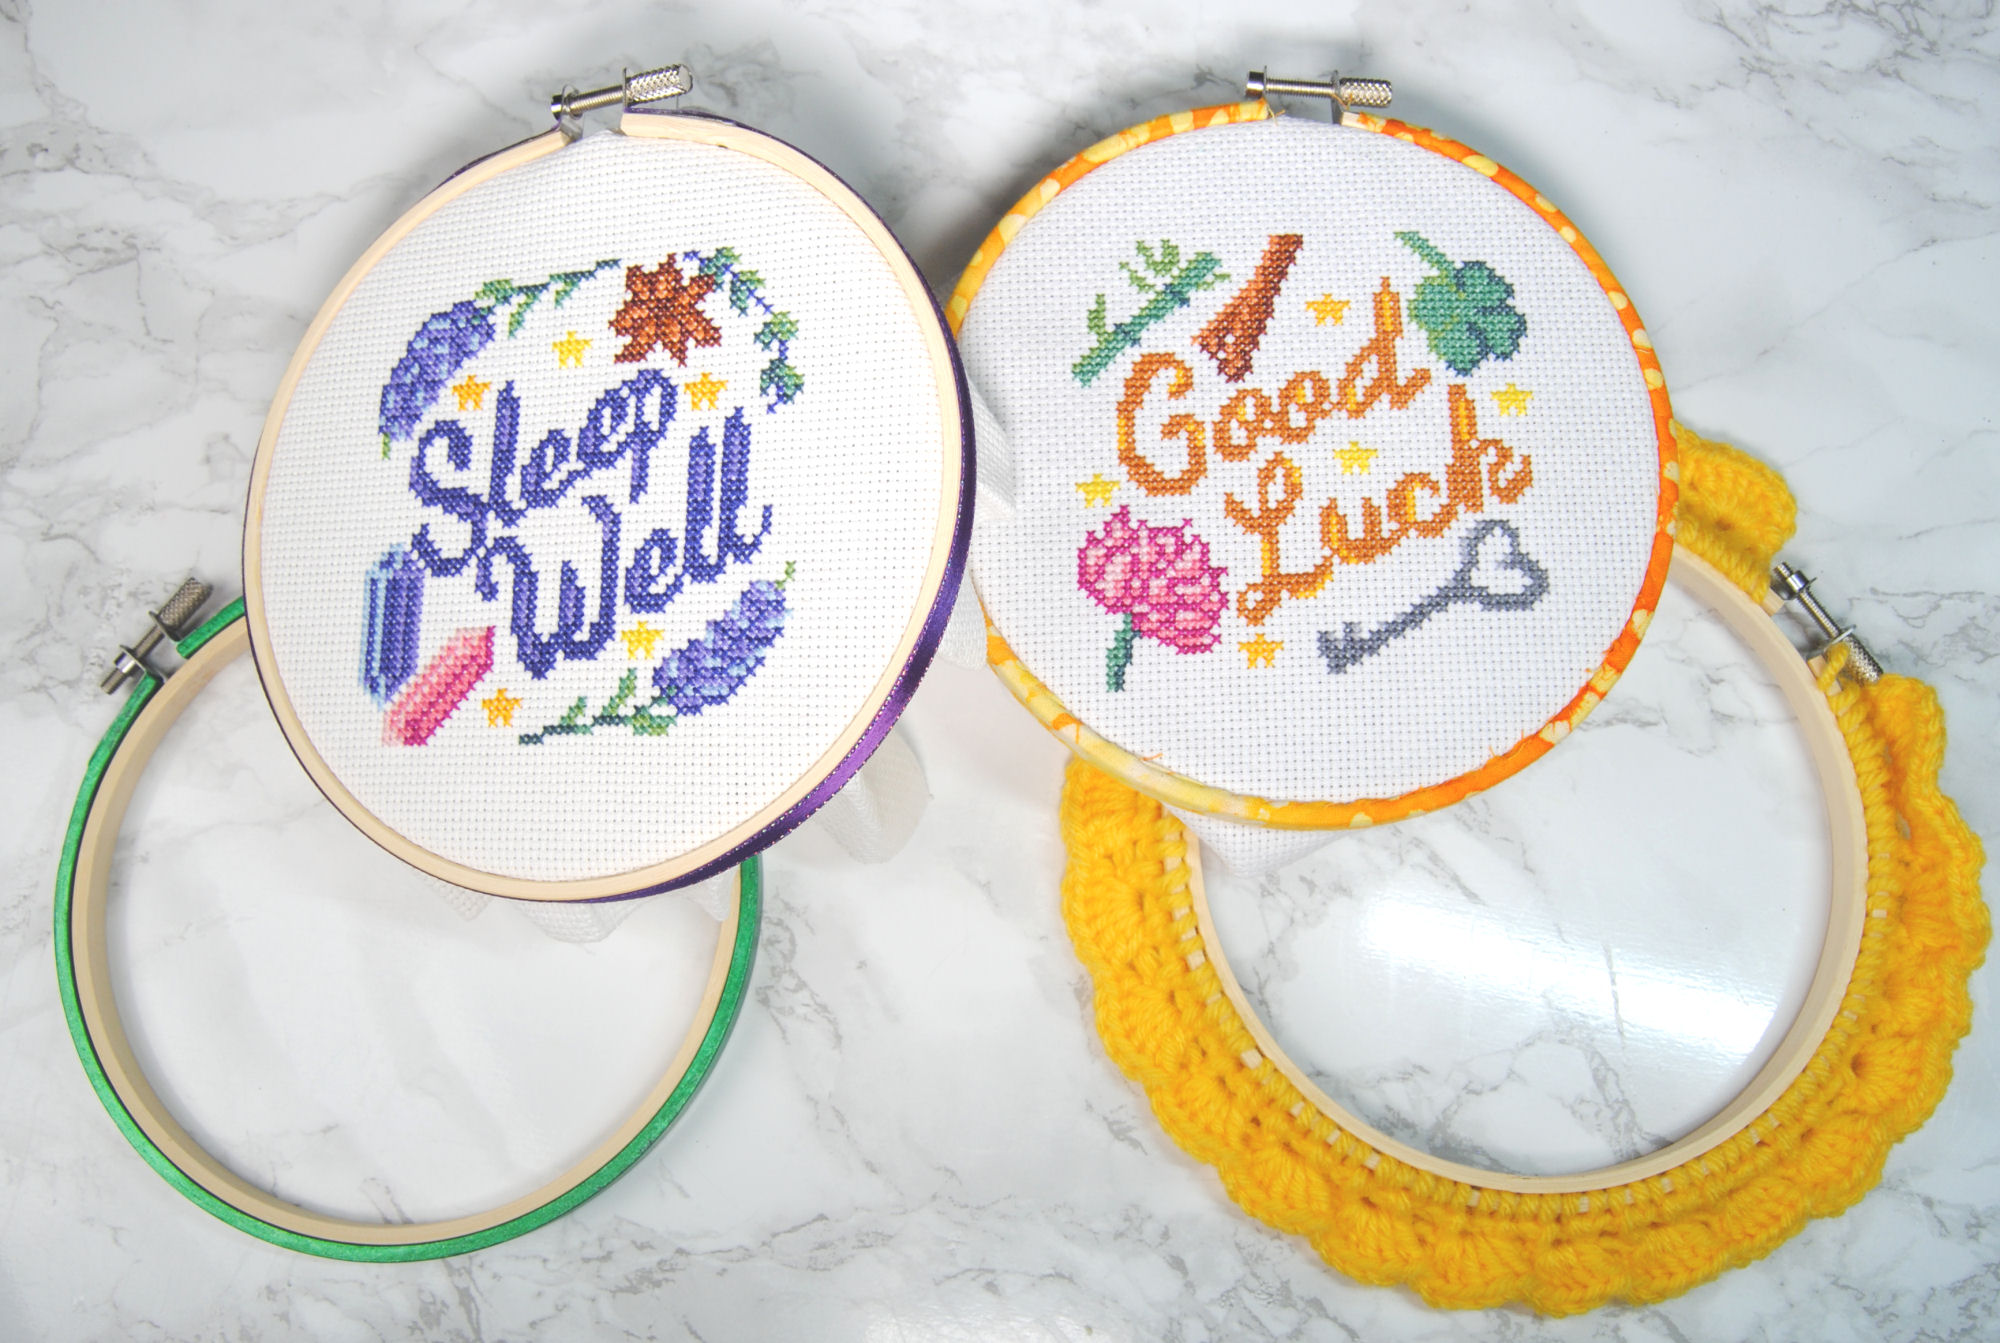 4 Pieces Embroidery Hoop Ring Plastic Cross Stitch Hoops Set Cross